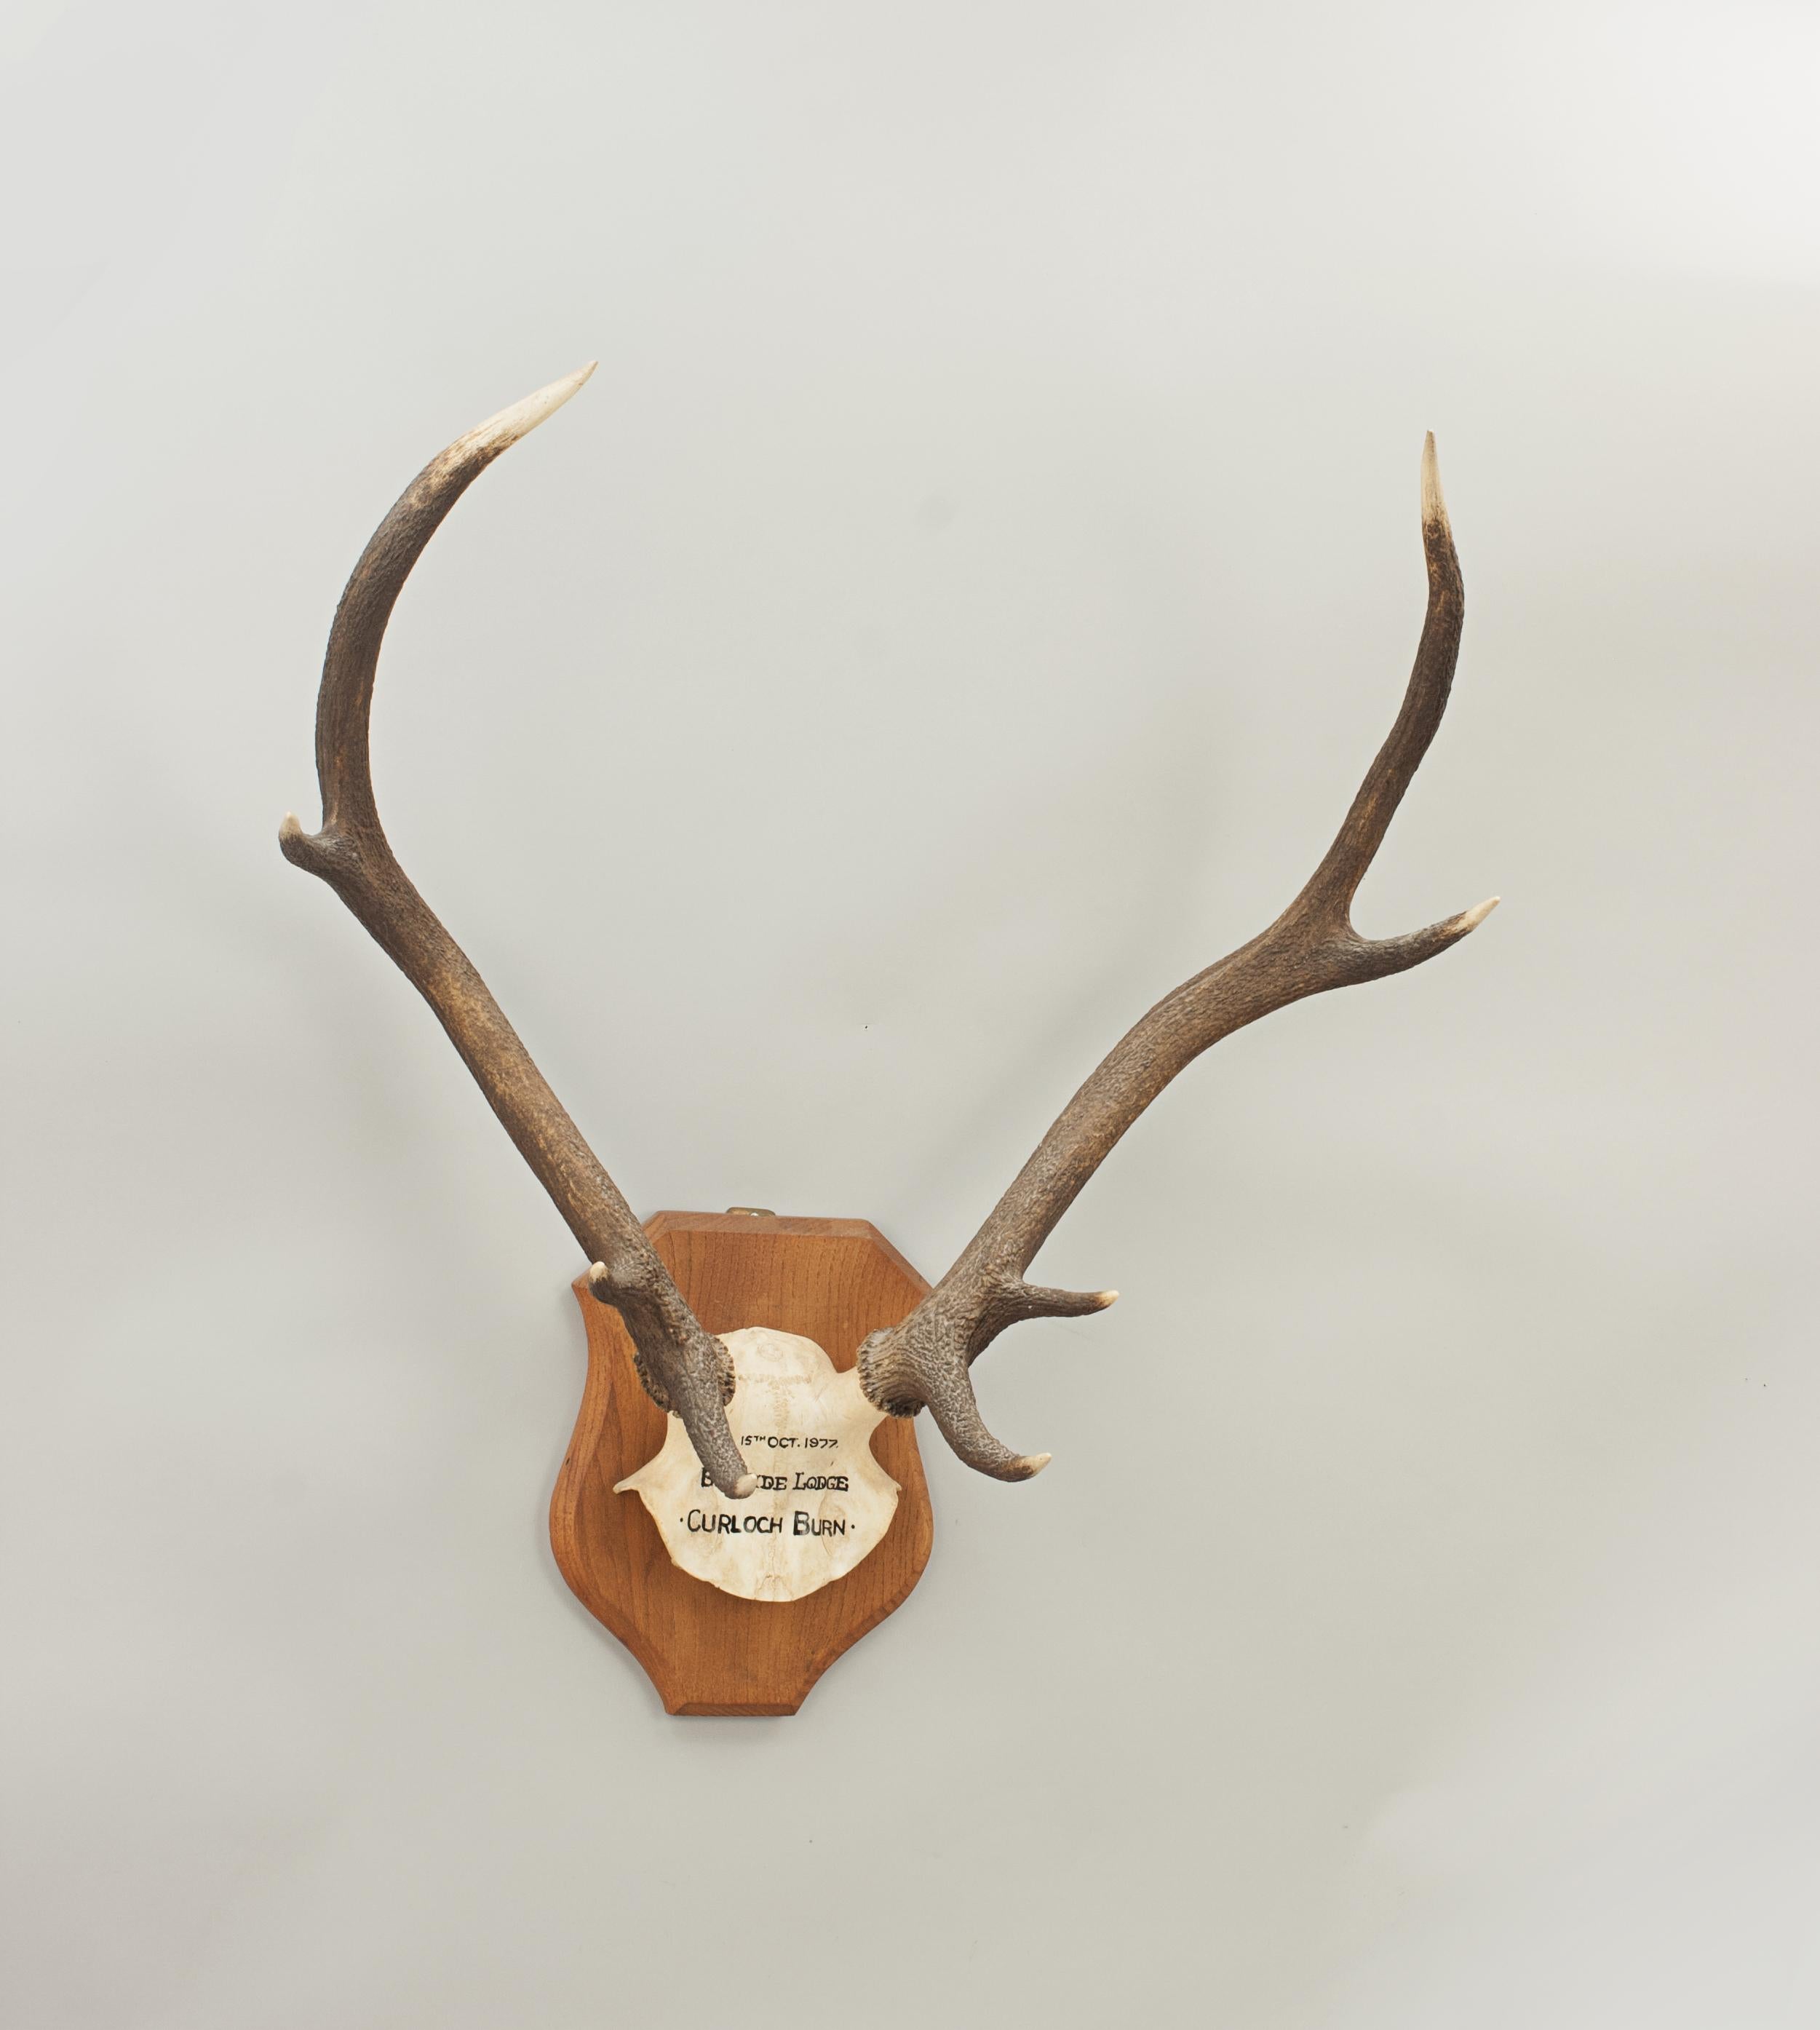 Red Deer Antlers, Cluny Castle, 1989.
A pair of 12 point red deer antlers with skull cap, mounted onto a wooden plaque. The shield is made from oak with profile edges. These stag antlers are an excellent wall display. Inscribed on the skull cap